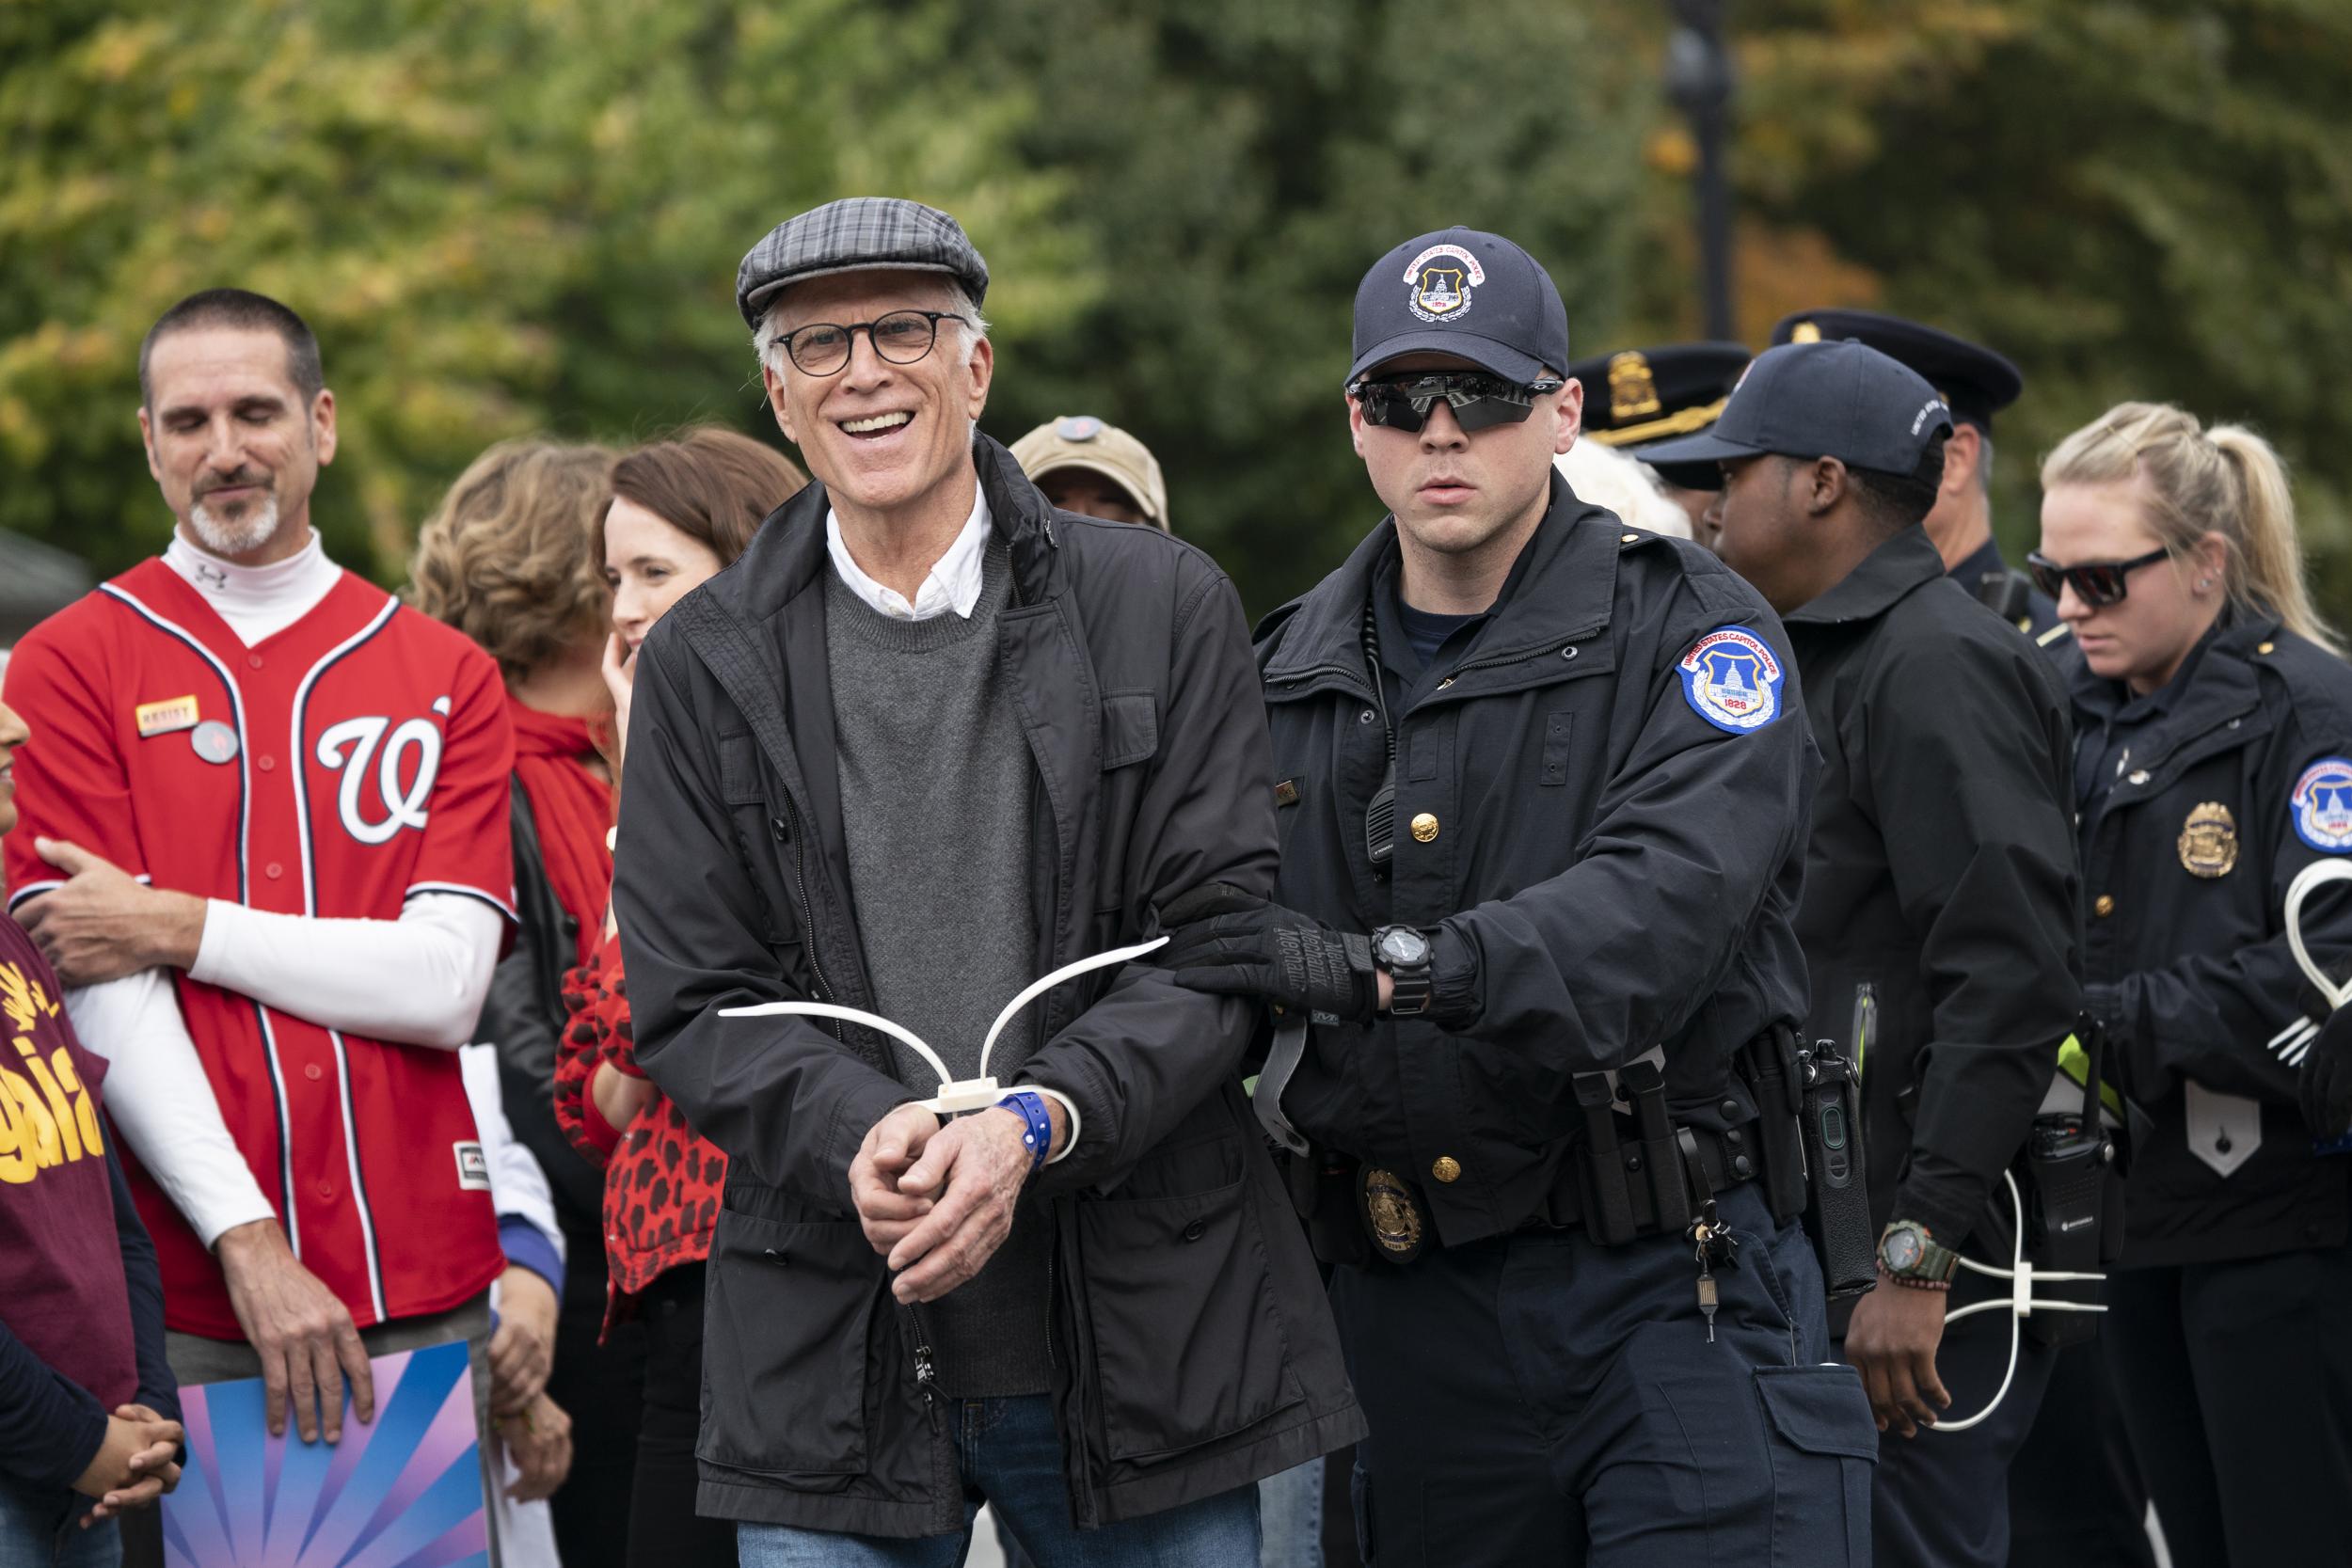 Ted Danson is arrested at the Capitol after he, Jane Fonda, and other demonstrators called on Congress for action to address climate change, in Washington, DC on 25, October 2019.